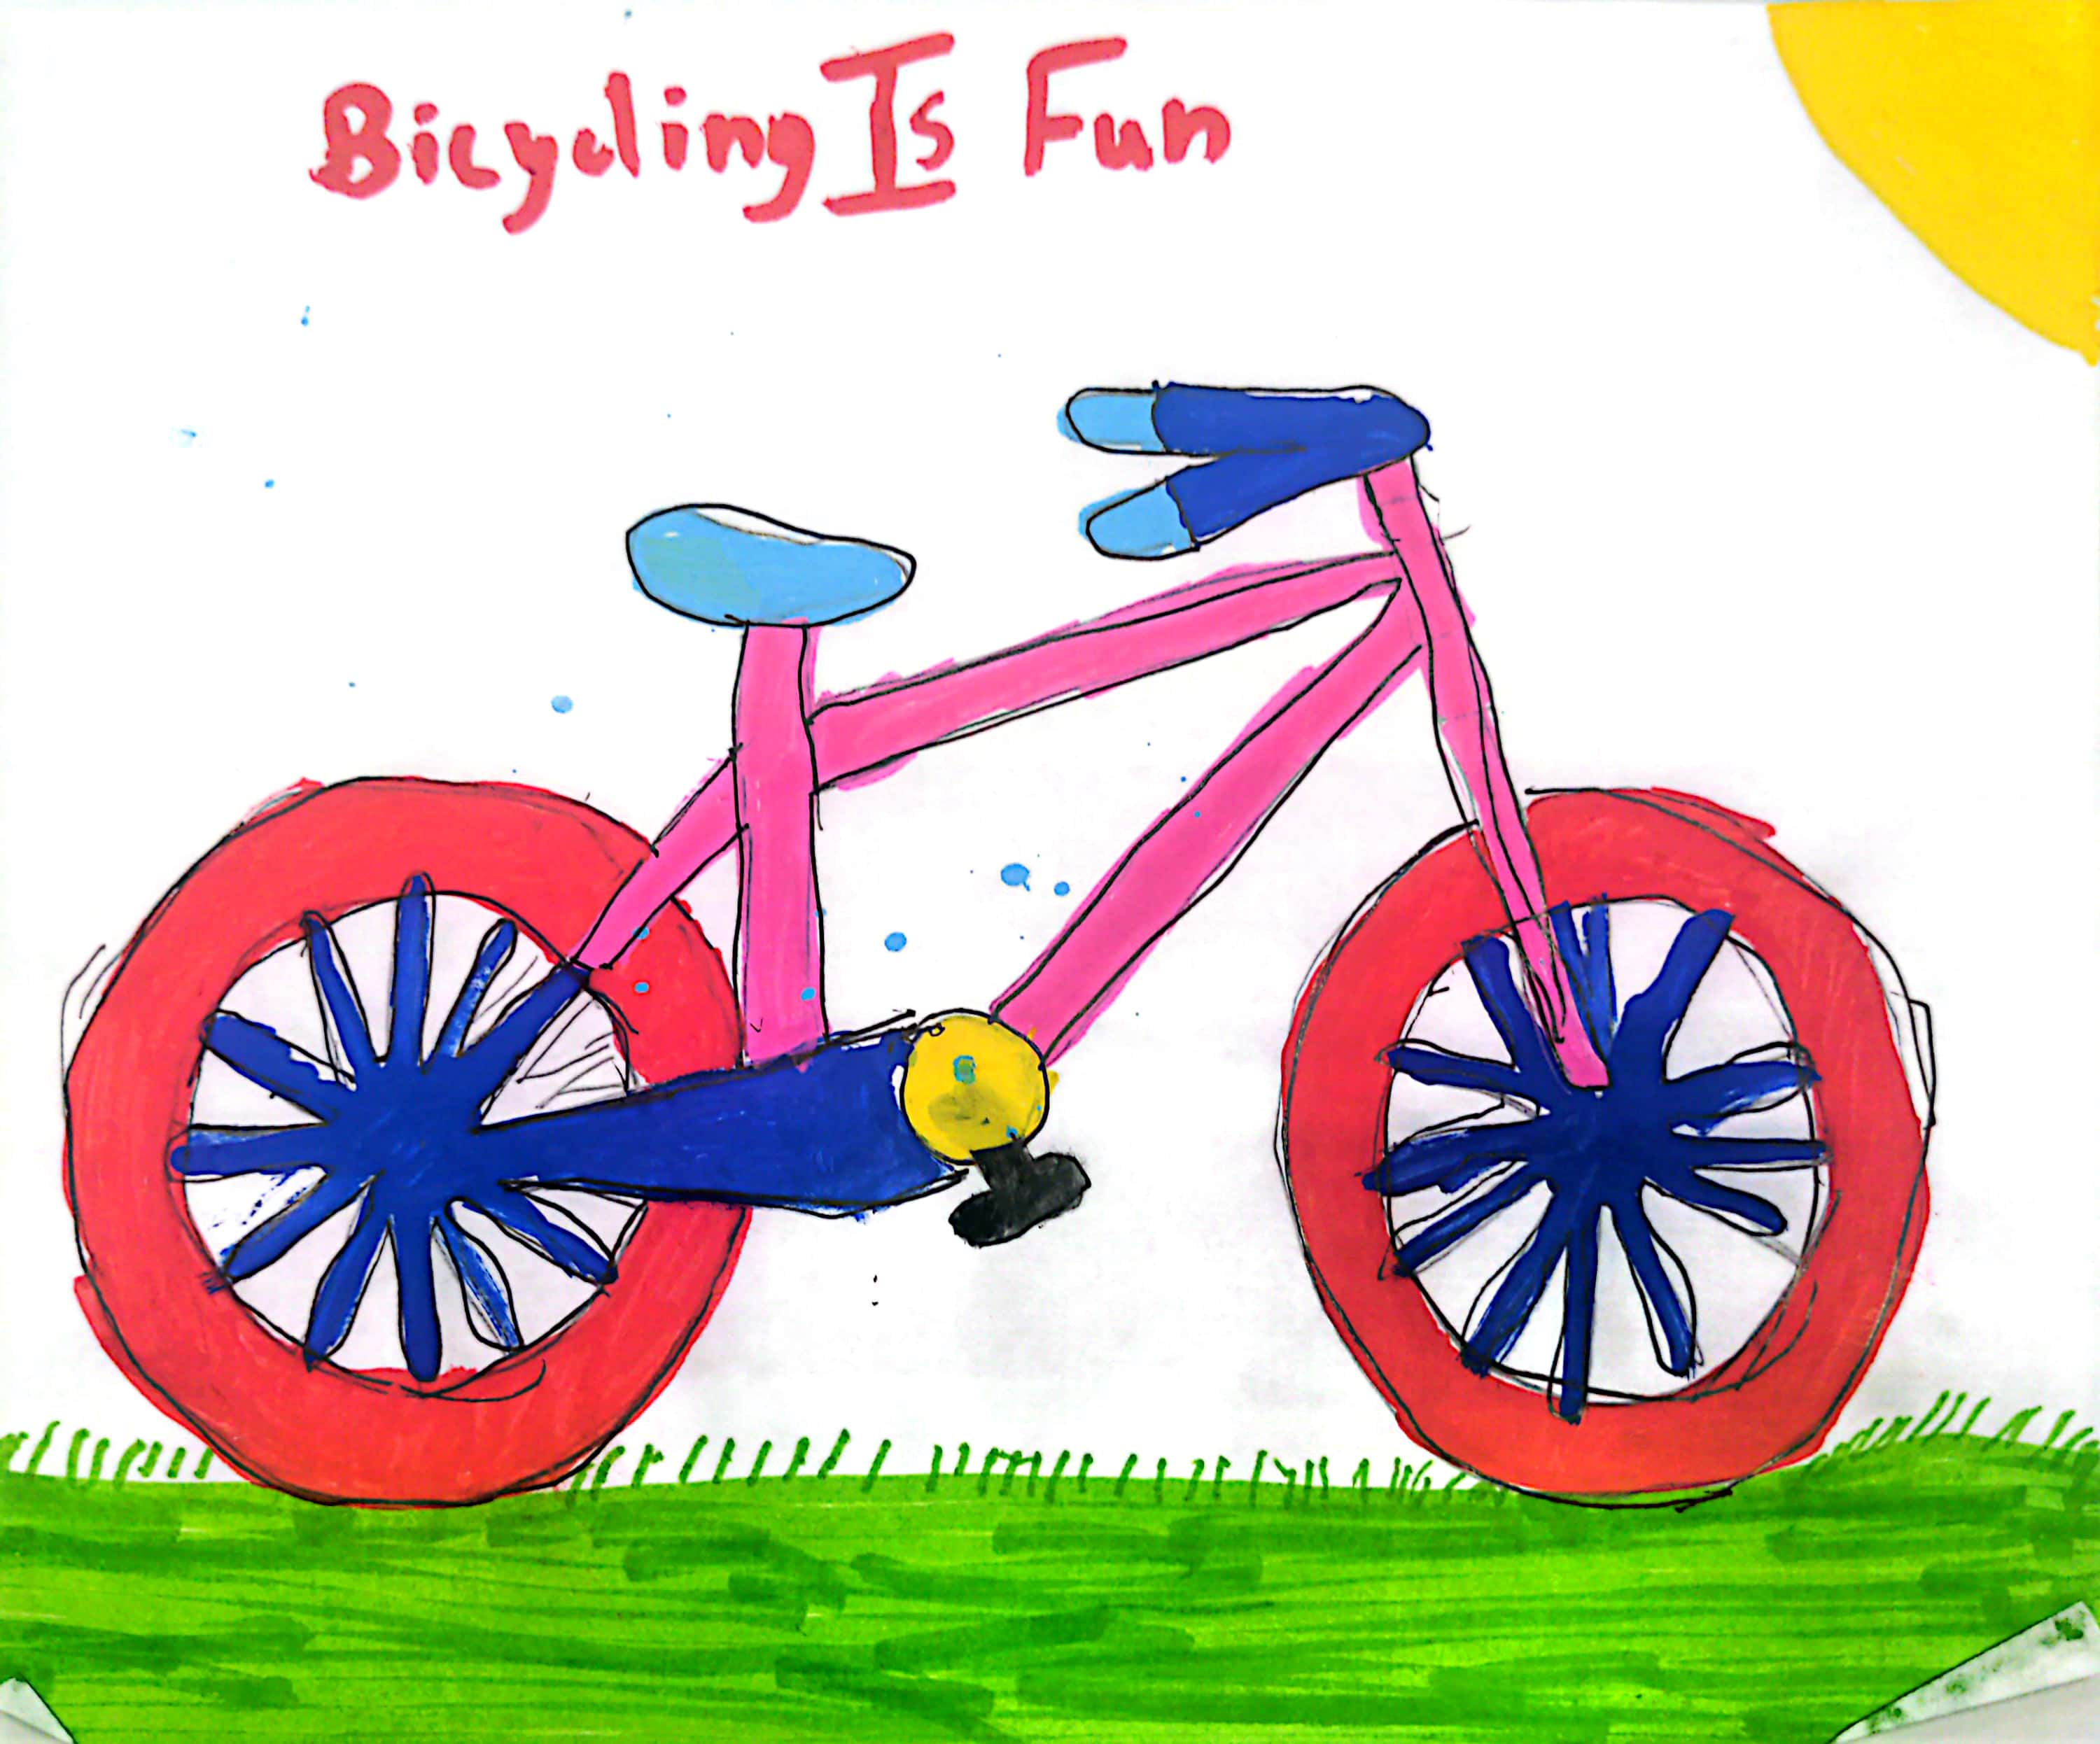 Student artwork with colorful bike prominently featured in the center, standing on green grass. Title 